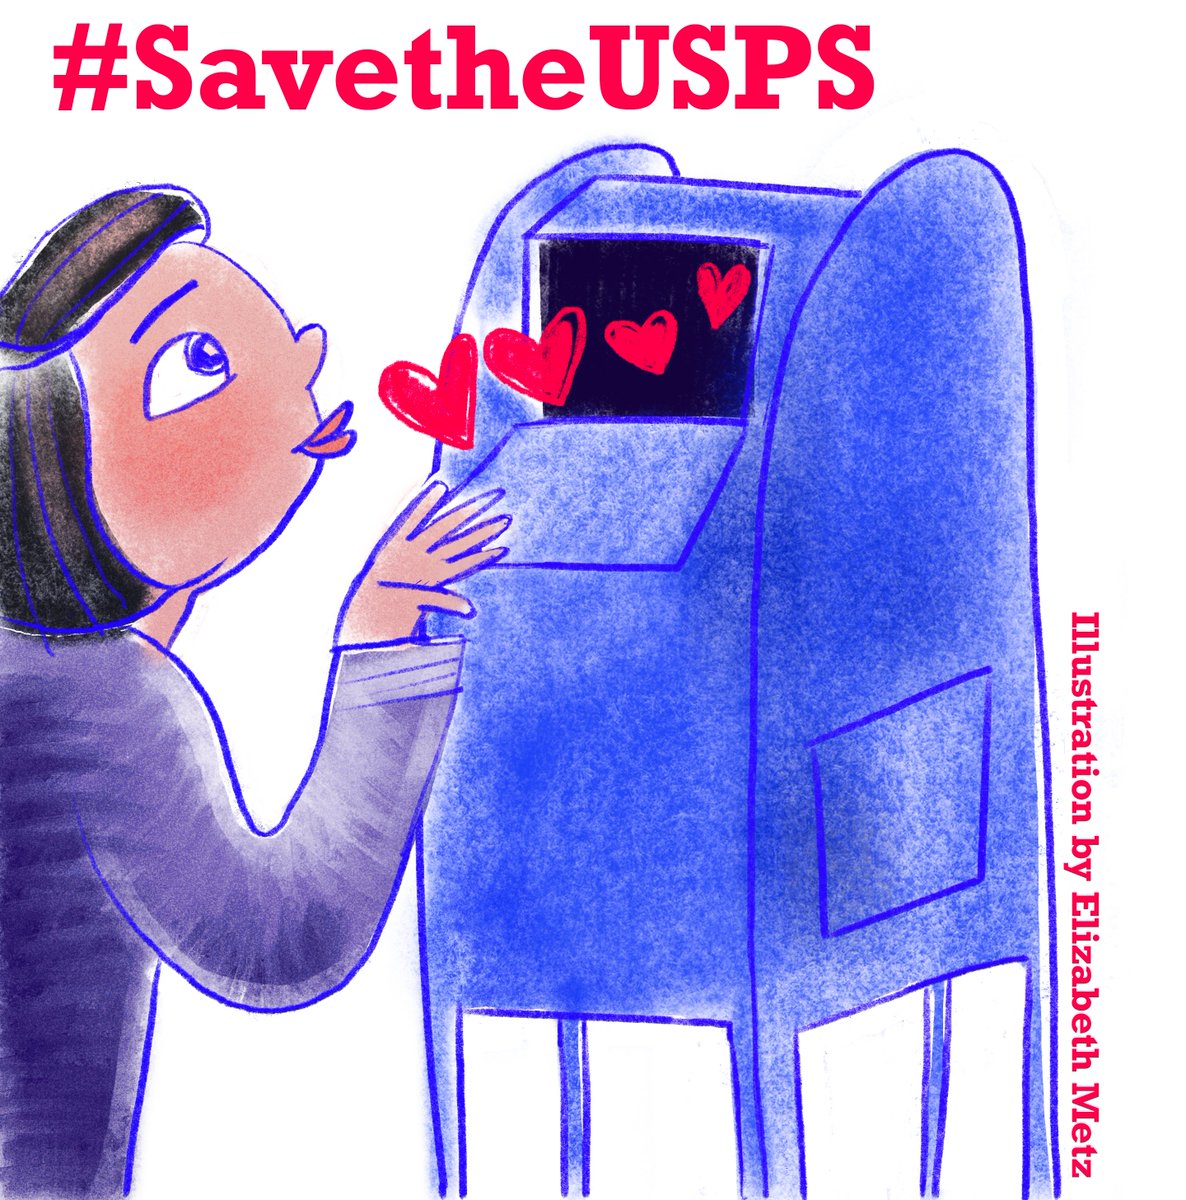 I want to  #SavetheUSPS mostly for the big reasons like delivering meds & ballots & birthday cards, serving remote areas, etc.But I've realized lately how important mail has been to me personally at different stages of my life. So forgive me, but I'm going to thread a little...